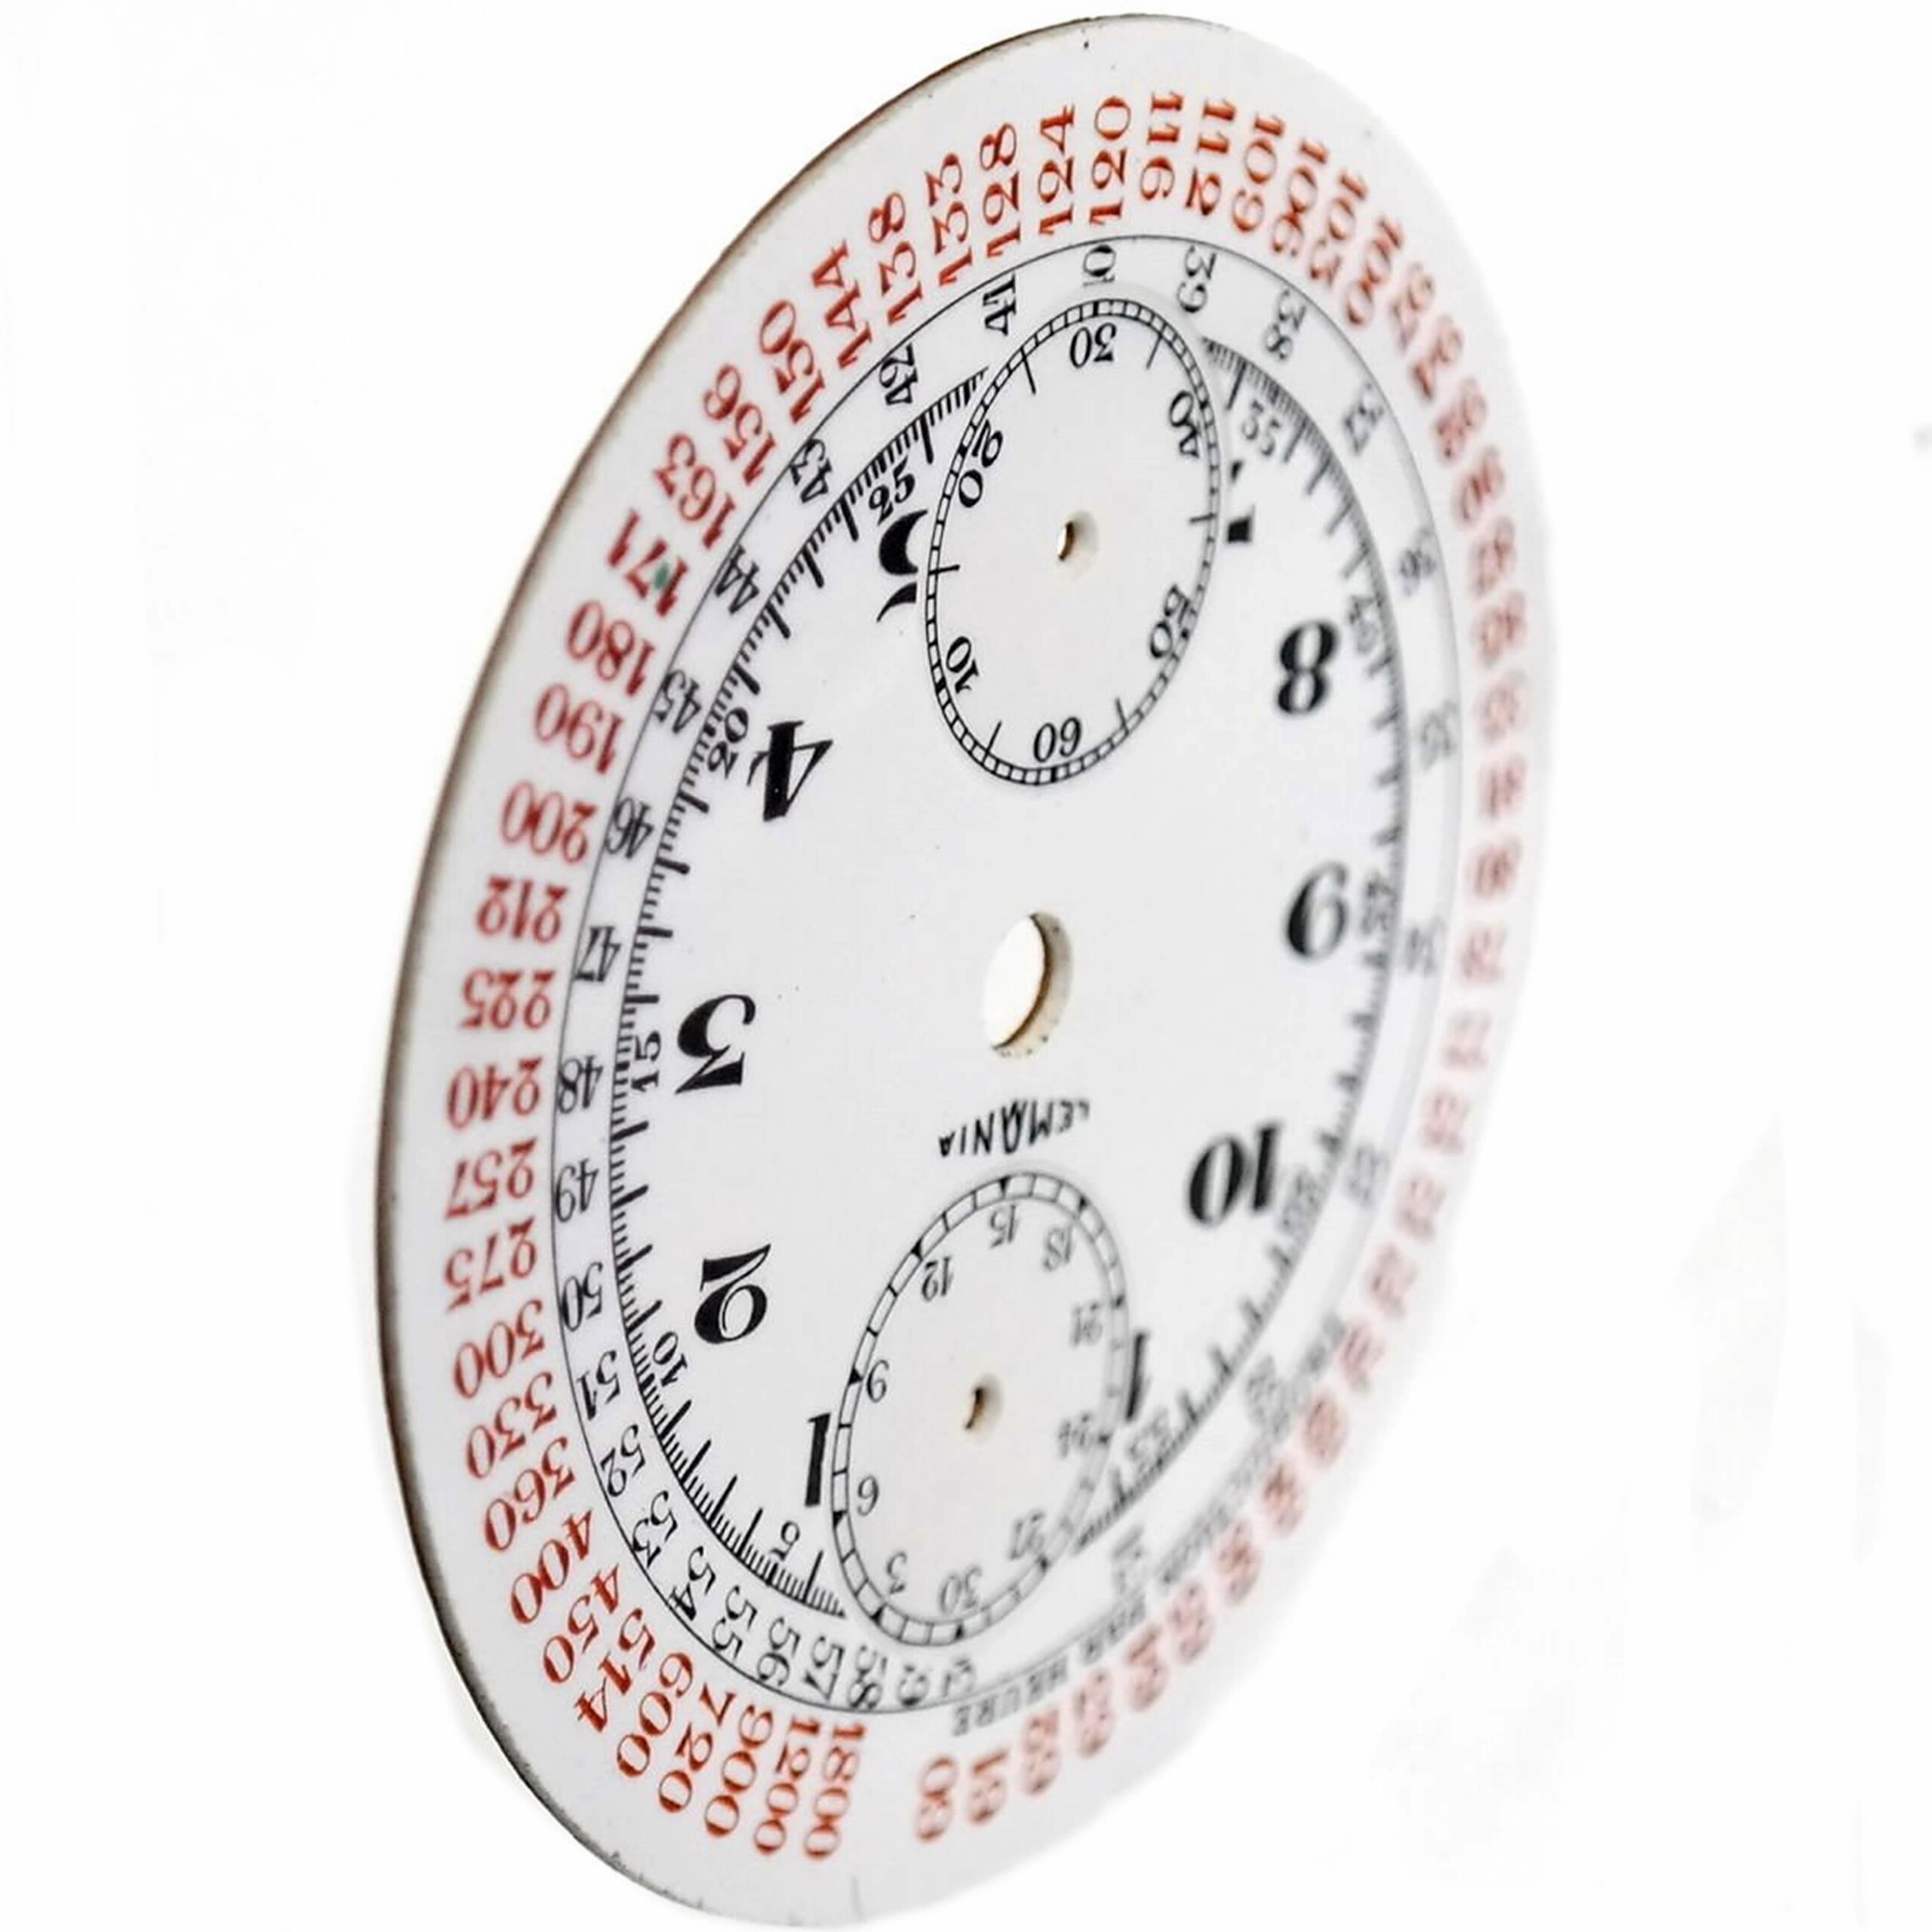 LEMANIA - Pocket Watch Dial - Chronograph - Production per Hour Counter